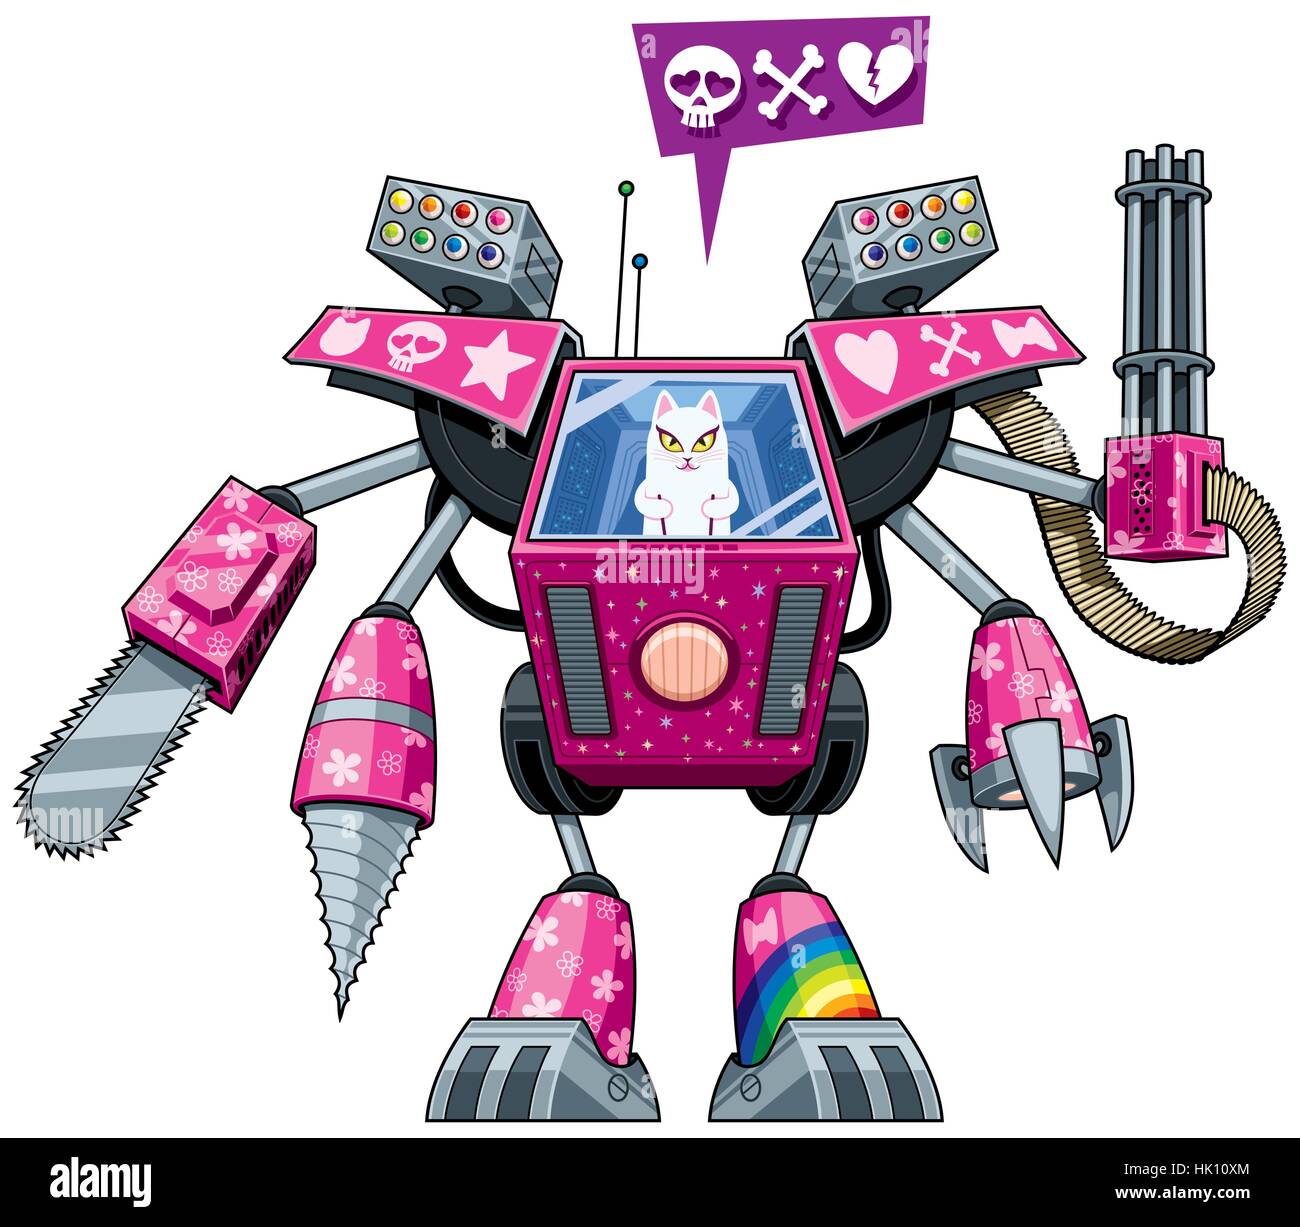 White pussycat operating pink robot in full battle gear. Stock Vector